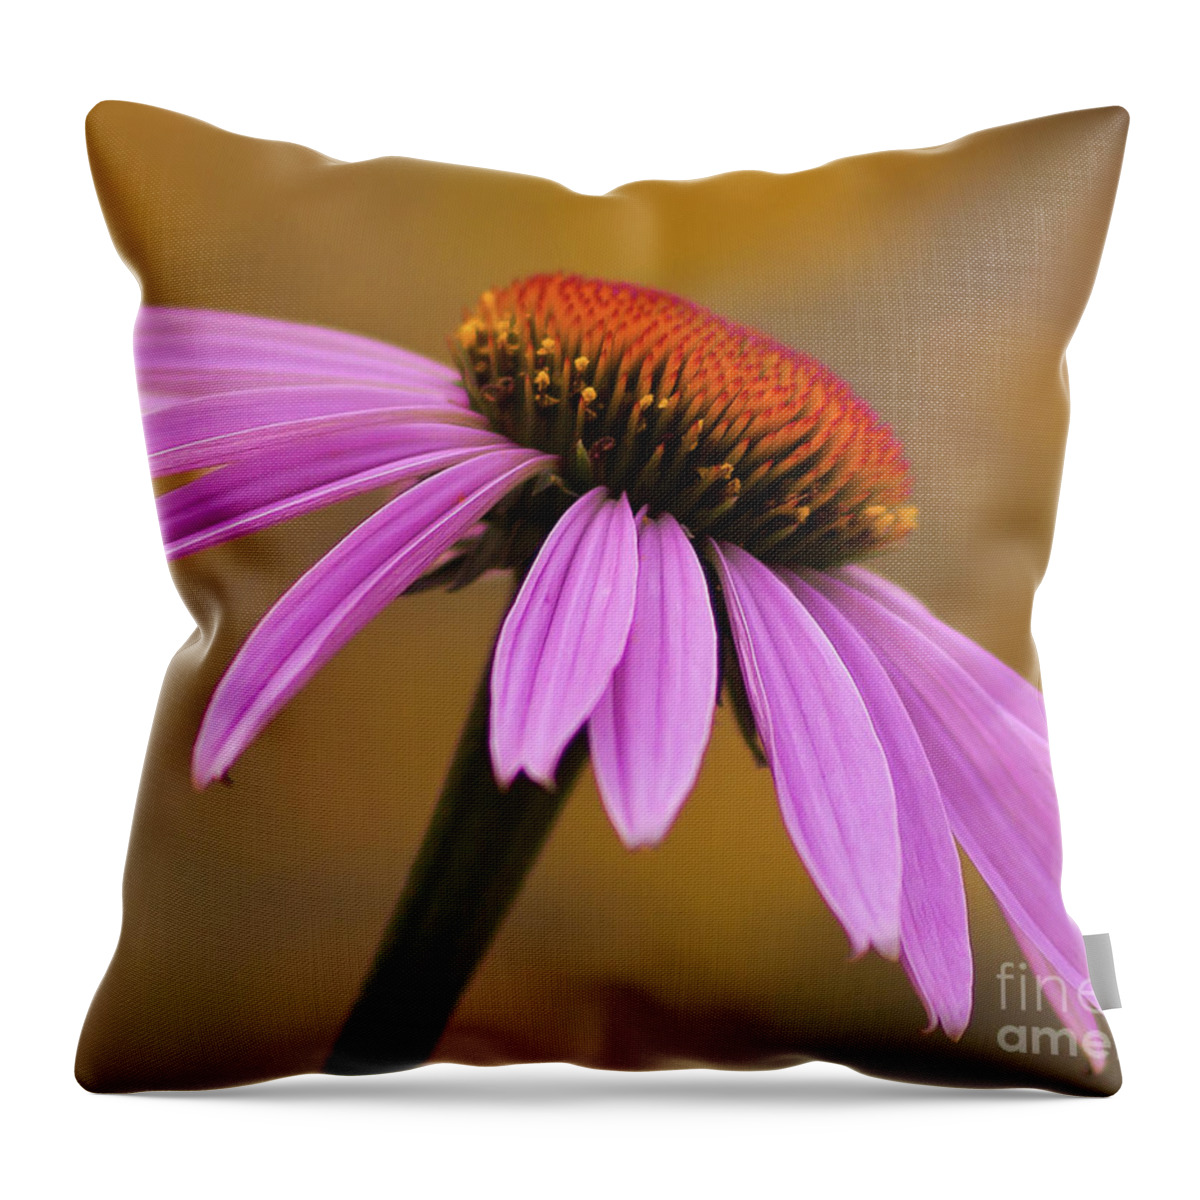 Flower Throw Pillow featuring the photograph Echinacea by Pam Holdsworth